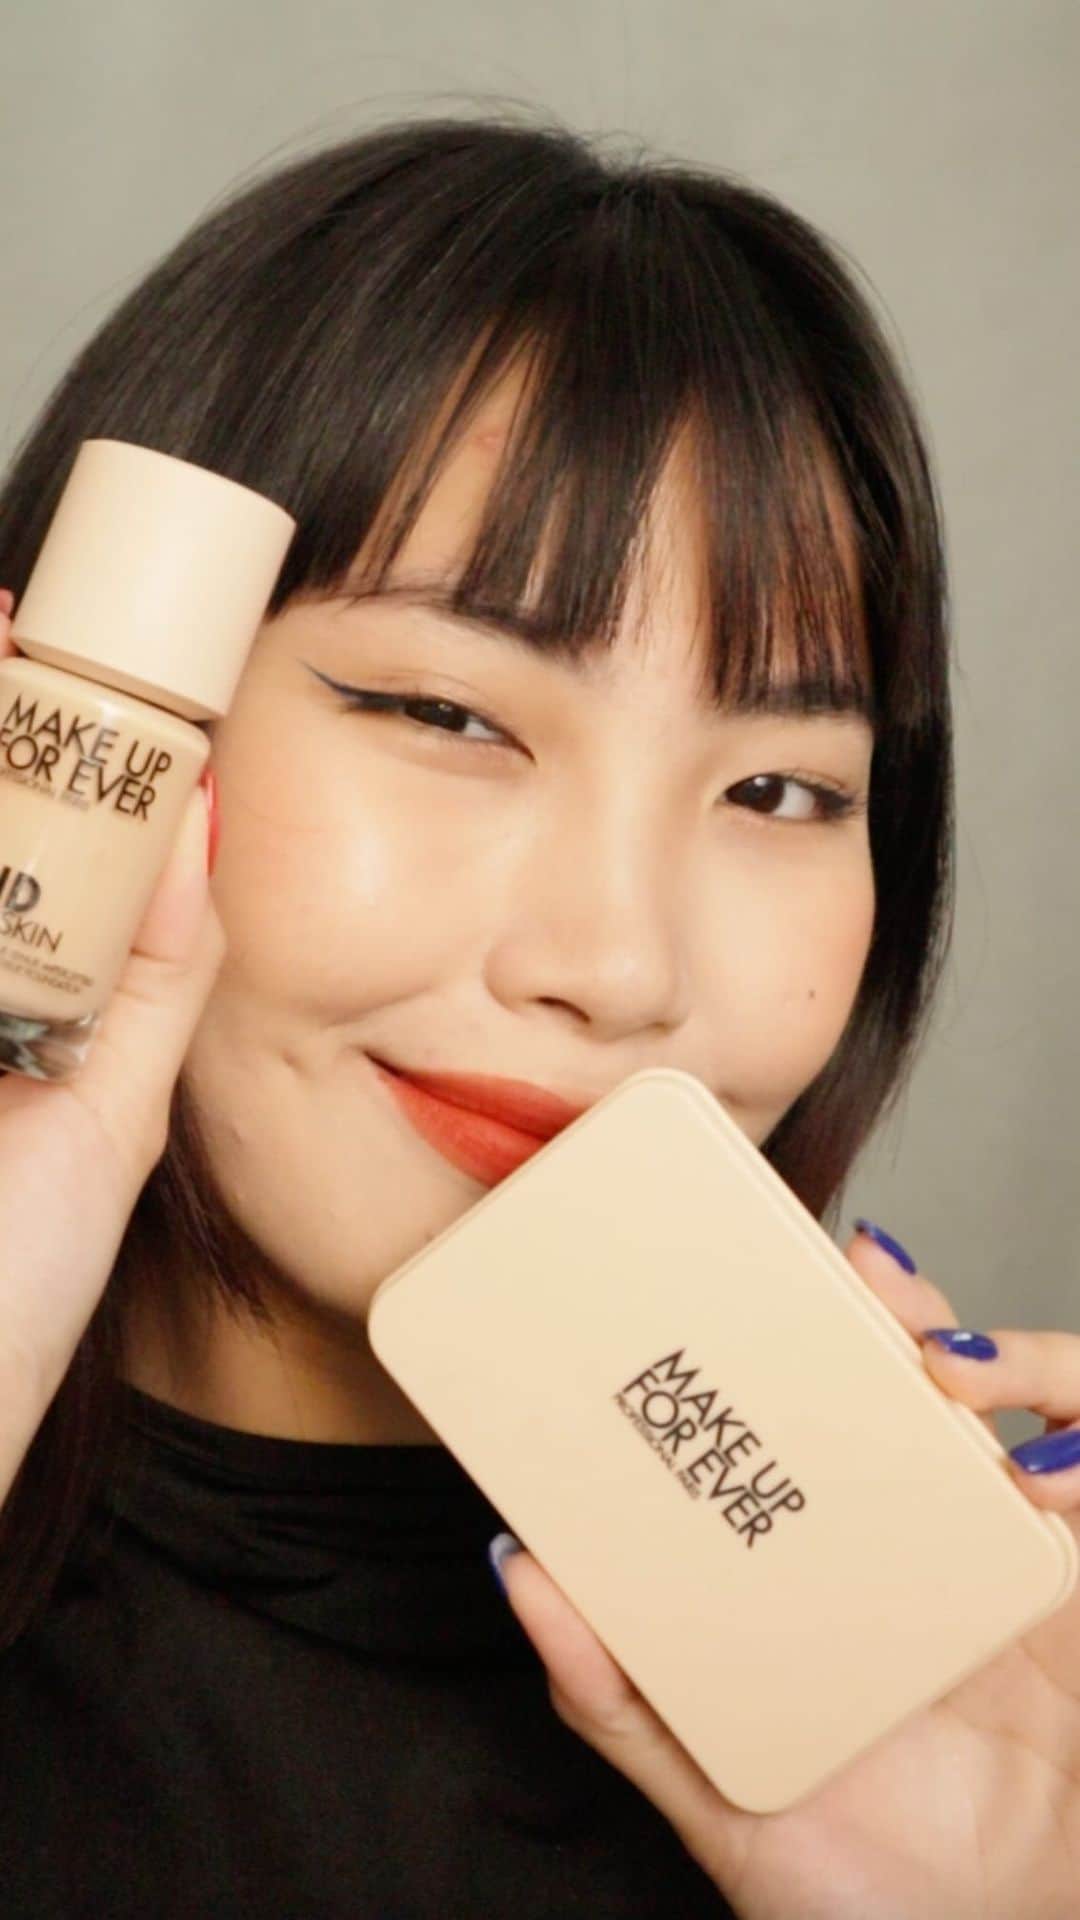 MAKE UP FOR EVER OFFICIALのインスタグラム：「TIPS FROM OUR PROS   @lleejan shows how to apply our all-time favorite #HDSKIN Liquid Foundation and our new #HDSKIN Powder Foundation. Which team are you?   #FocusOnMe #MAKEUPFOREVER」